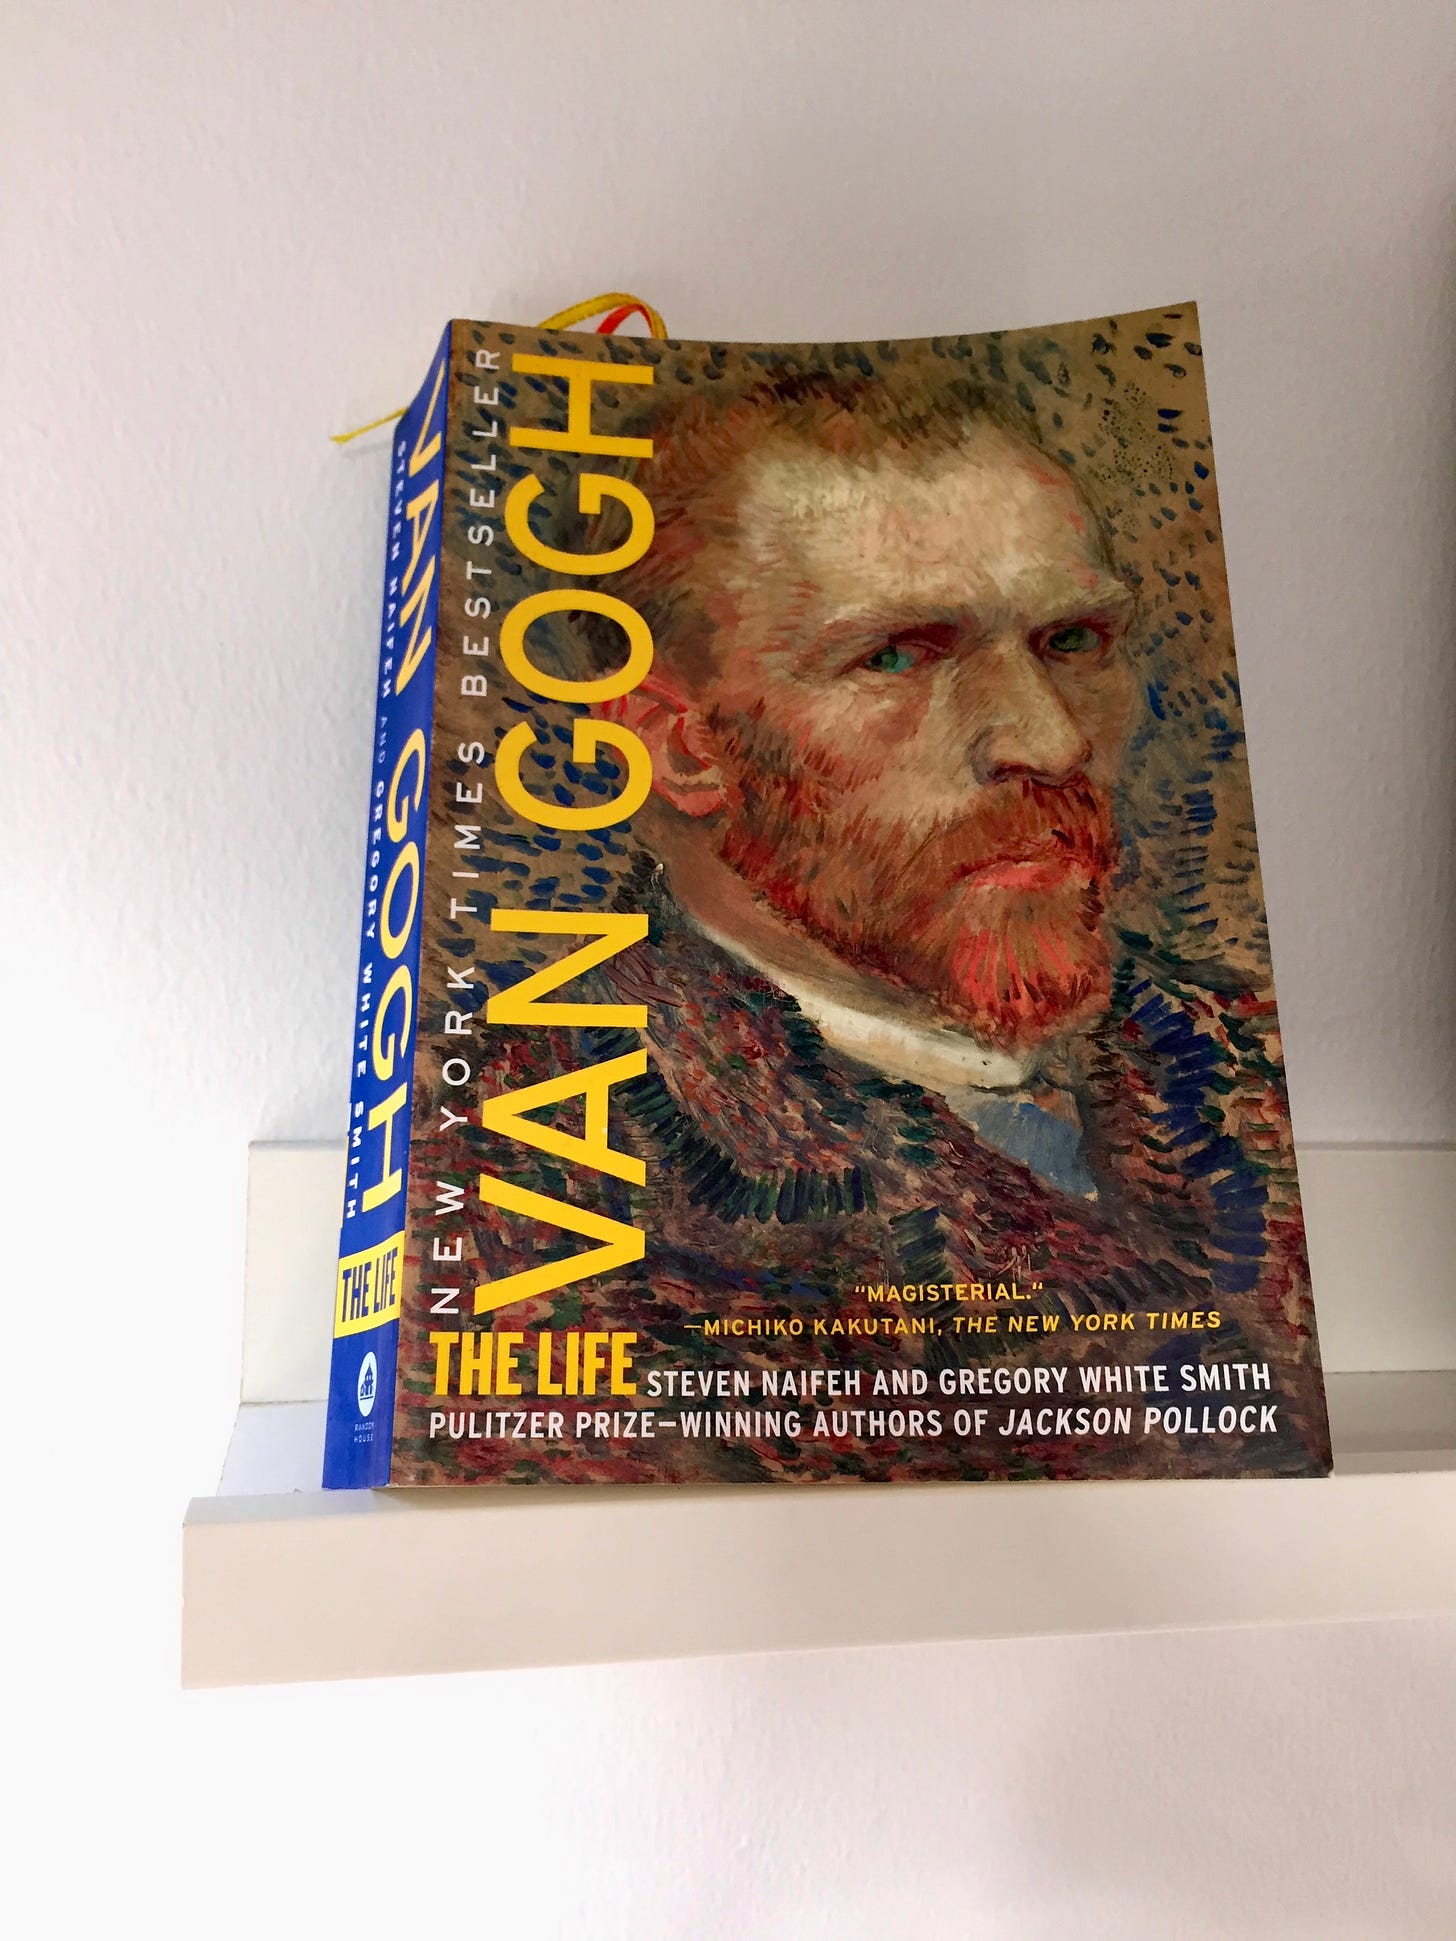 Photo of the book, Van Gogh, The Life by Steven Naifeh and Gregory White Smith. The book cover showed a self-portrait of Vincent van Gogh, his piercing blue eyes seems to be looking intensely at the viewer. He has ginger reddish coloured beard, and his hairline has started to recede. He appeared to be wearing a jacket.